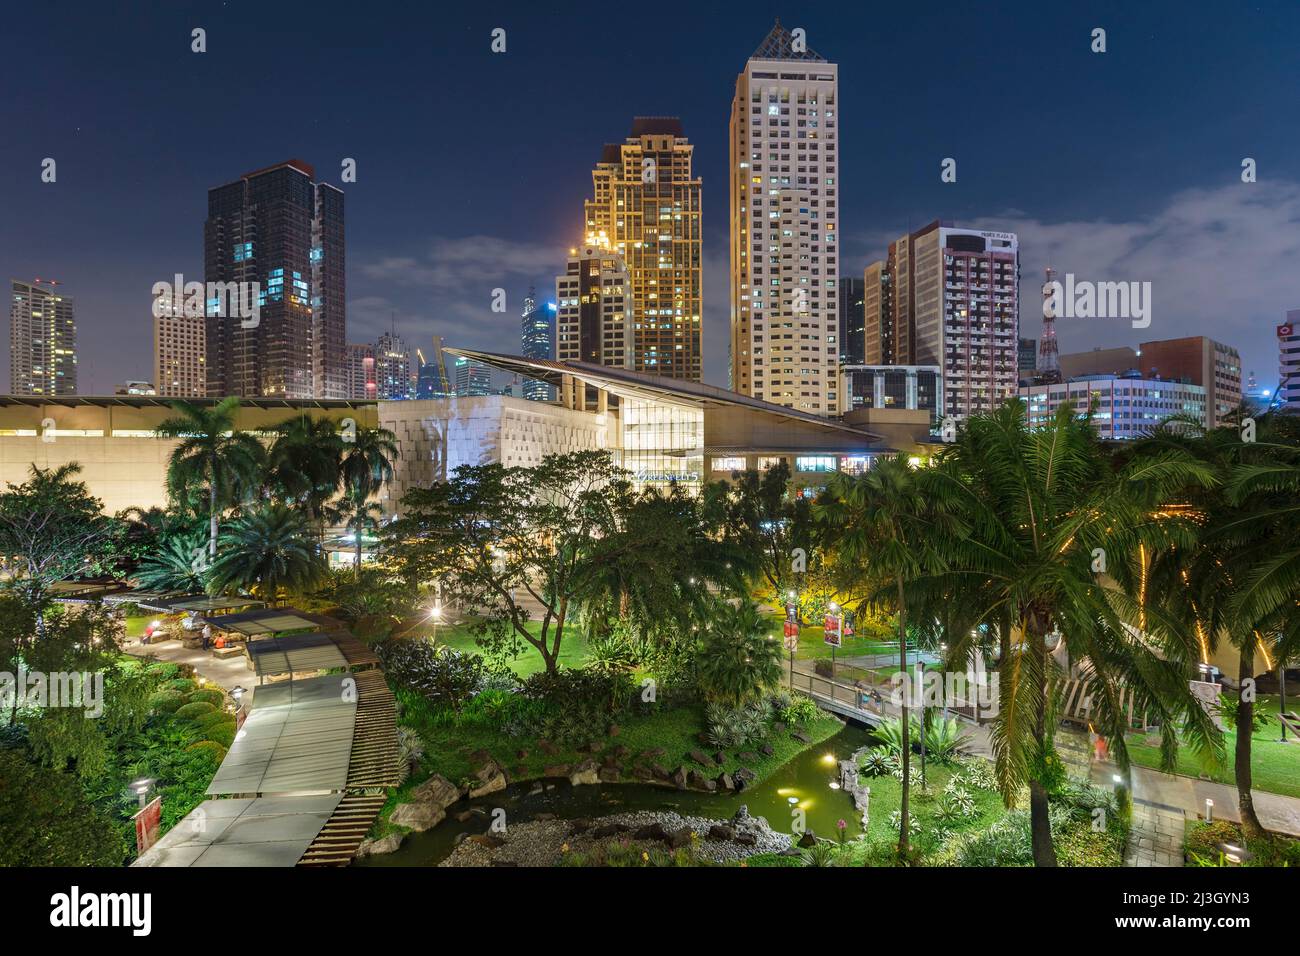 Philippines, Metro Manila, Makati District, general view of Greenbelt Mall at night and illuminated skyscrapers in the background Stock Photo